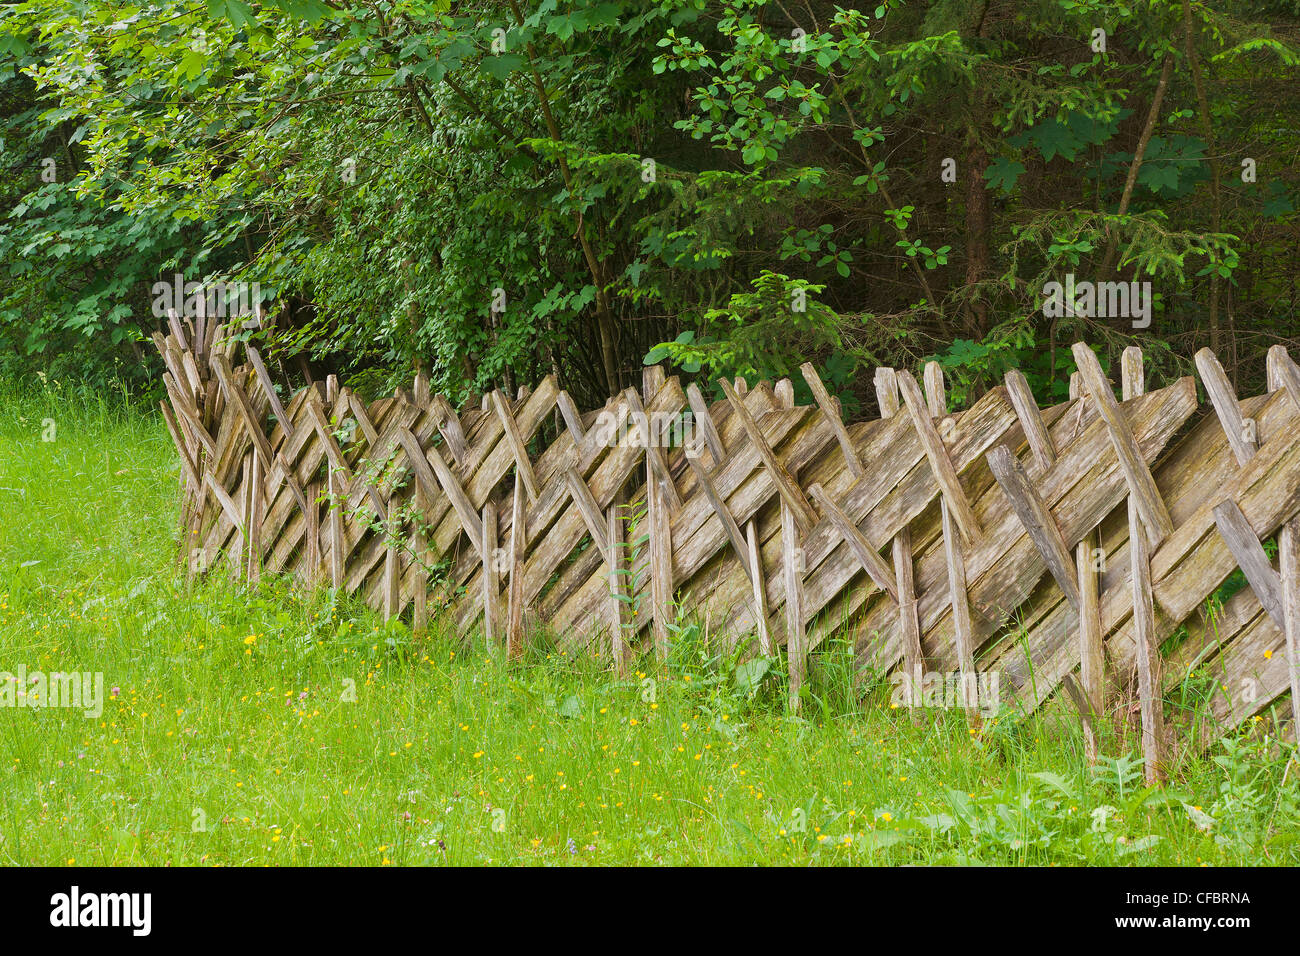 Europe, farm museum, museum, historical, old, rest, recover, spare time, vacation, tourism, fence, post, jamb, fence post Stock Photo